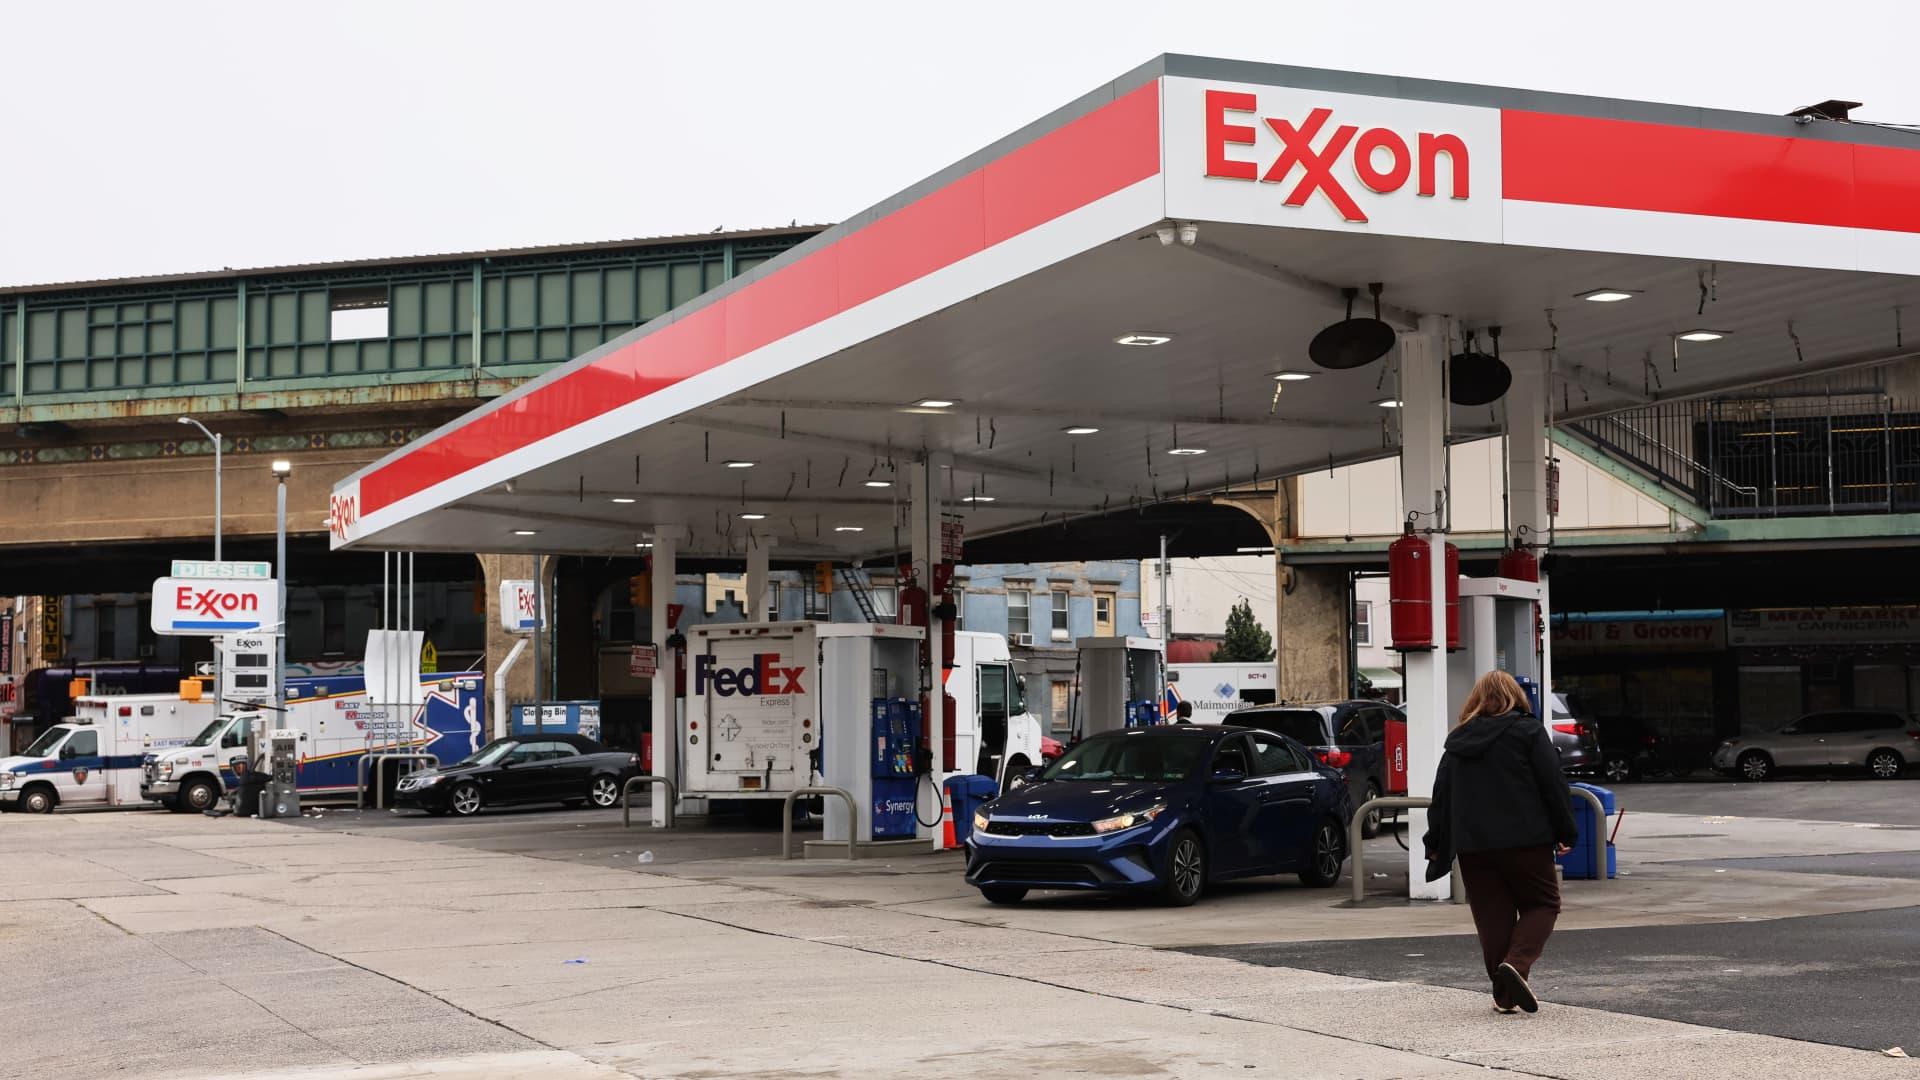 Exxon stock fell as earnings missed on lower natural gas prices and squeezed refining margins